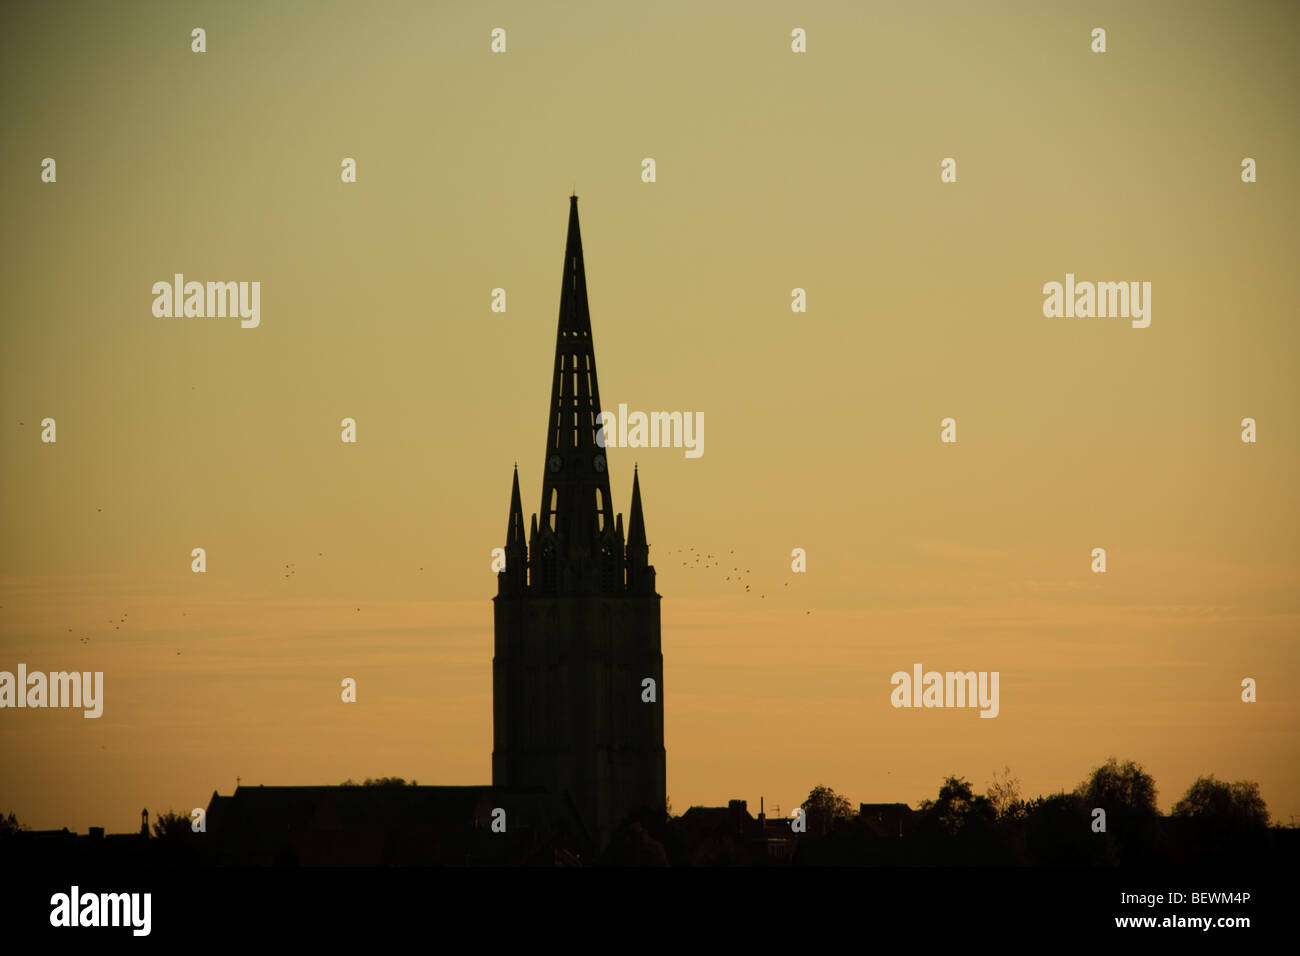 The church silhouette at sunset Stock Photo